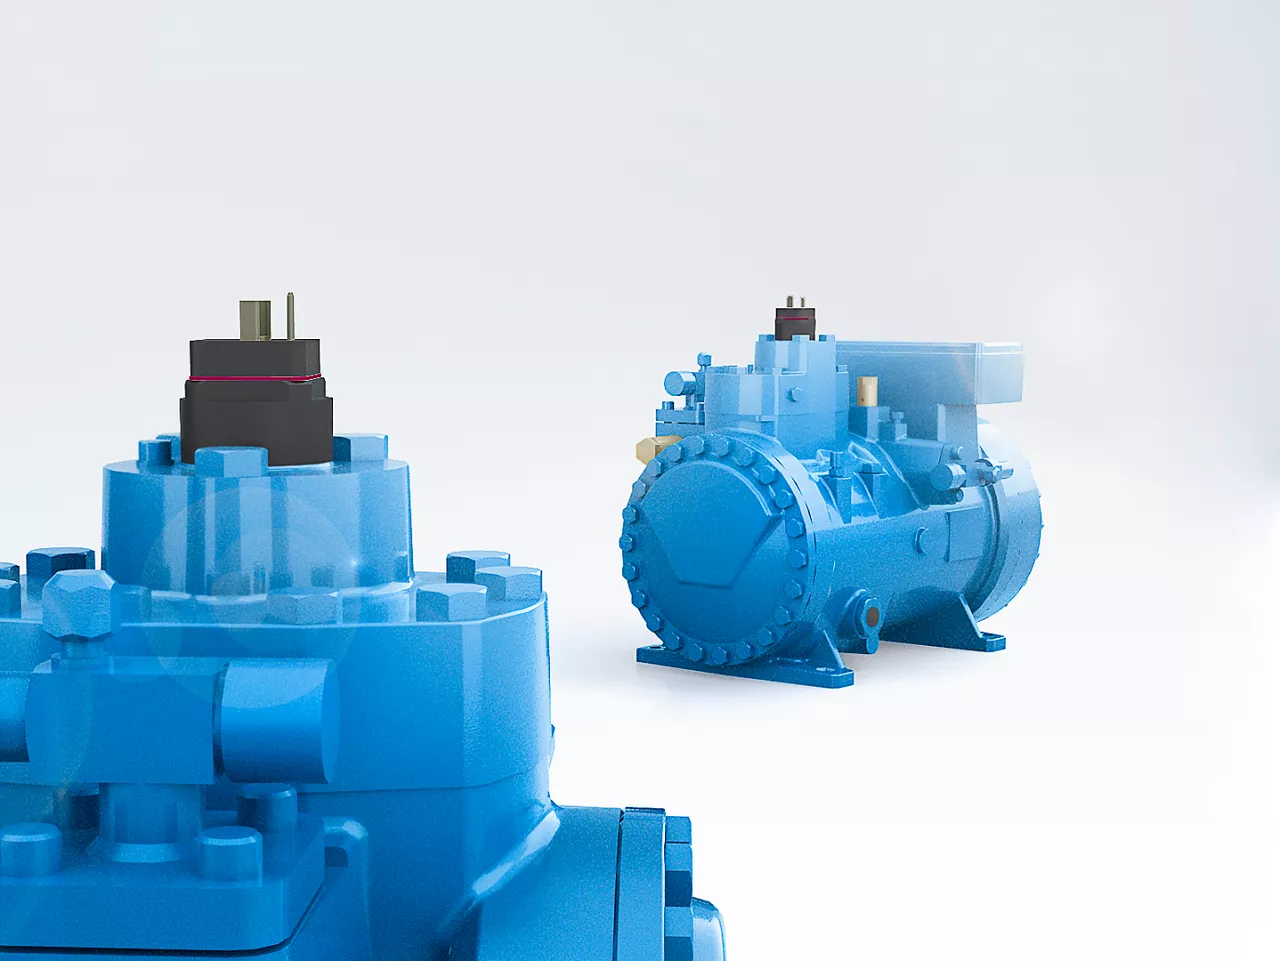 Frascold offers an innovative range of transcritical CO2 semi-hermetic compressors